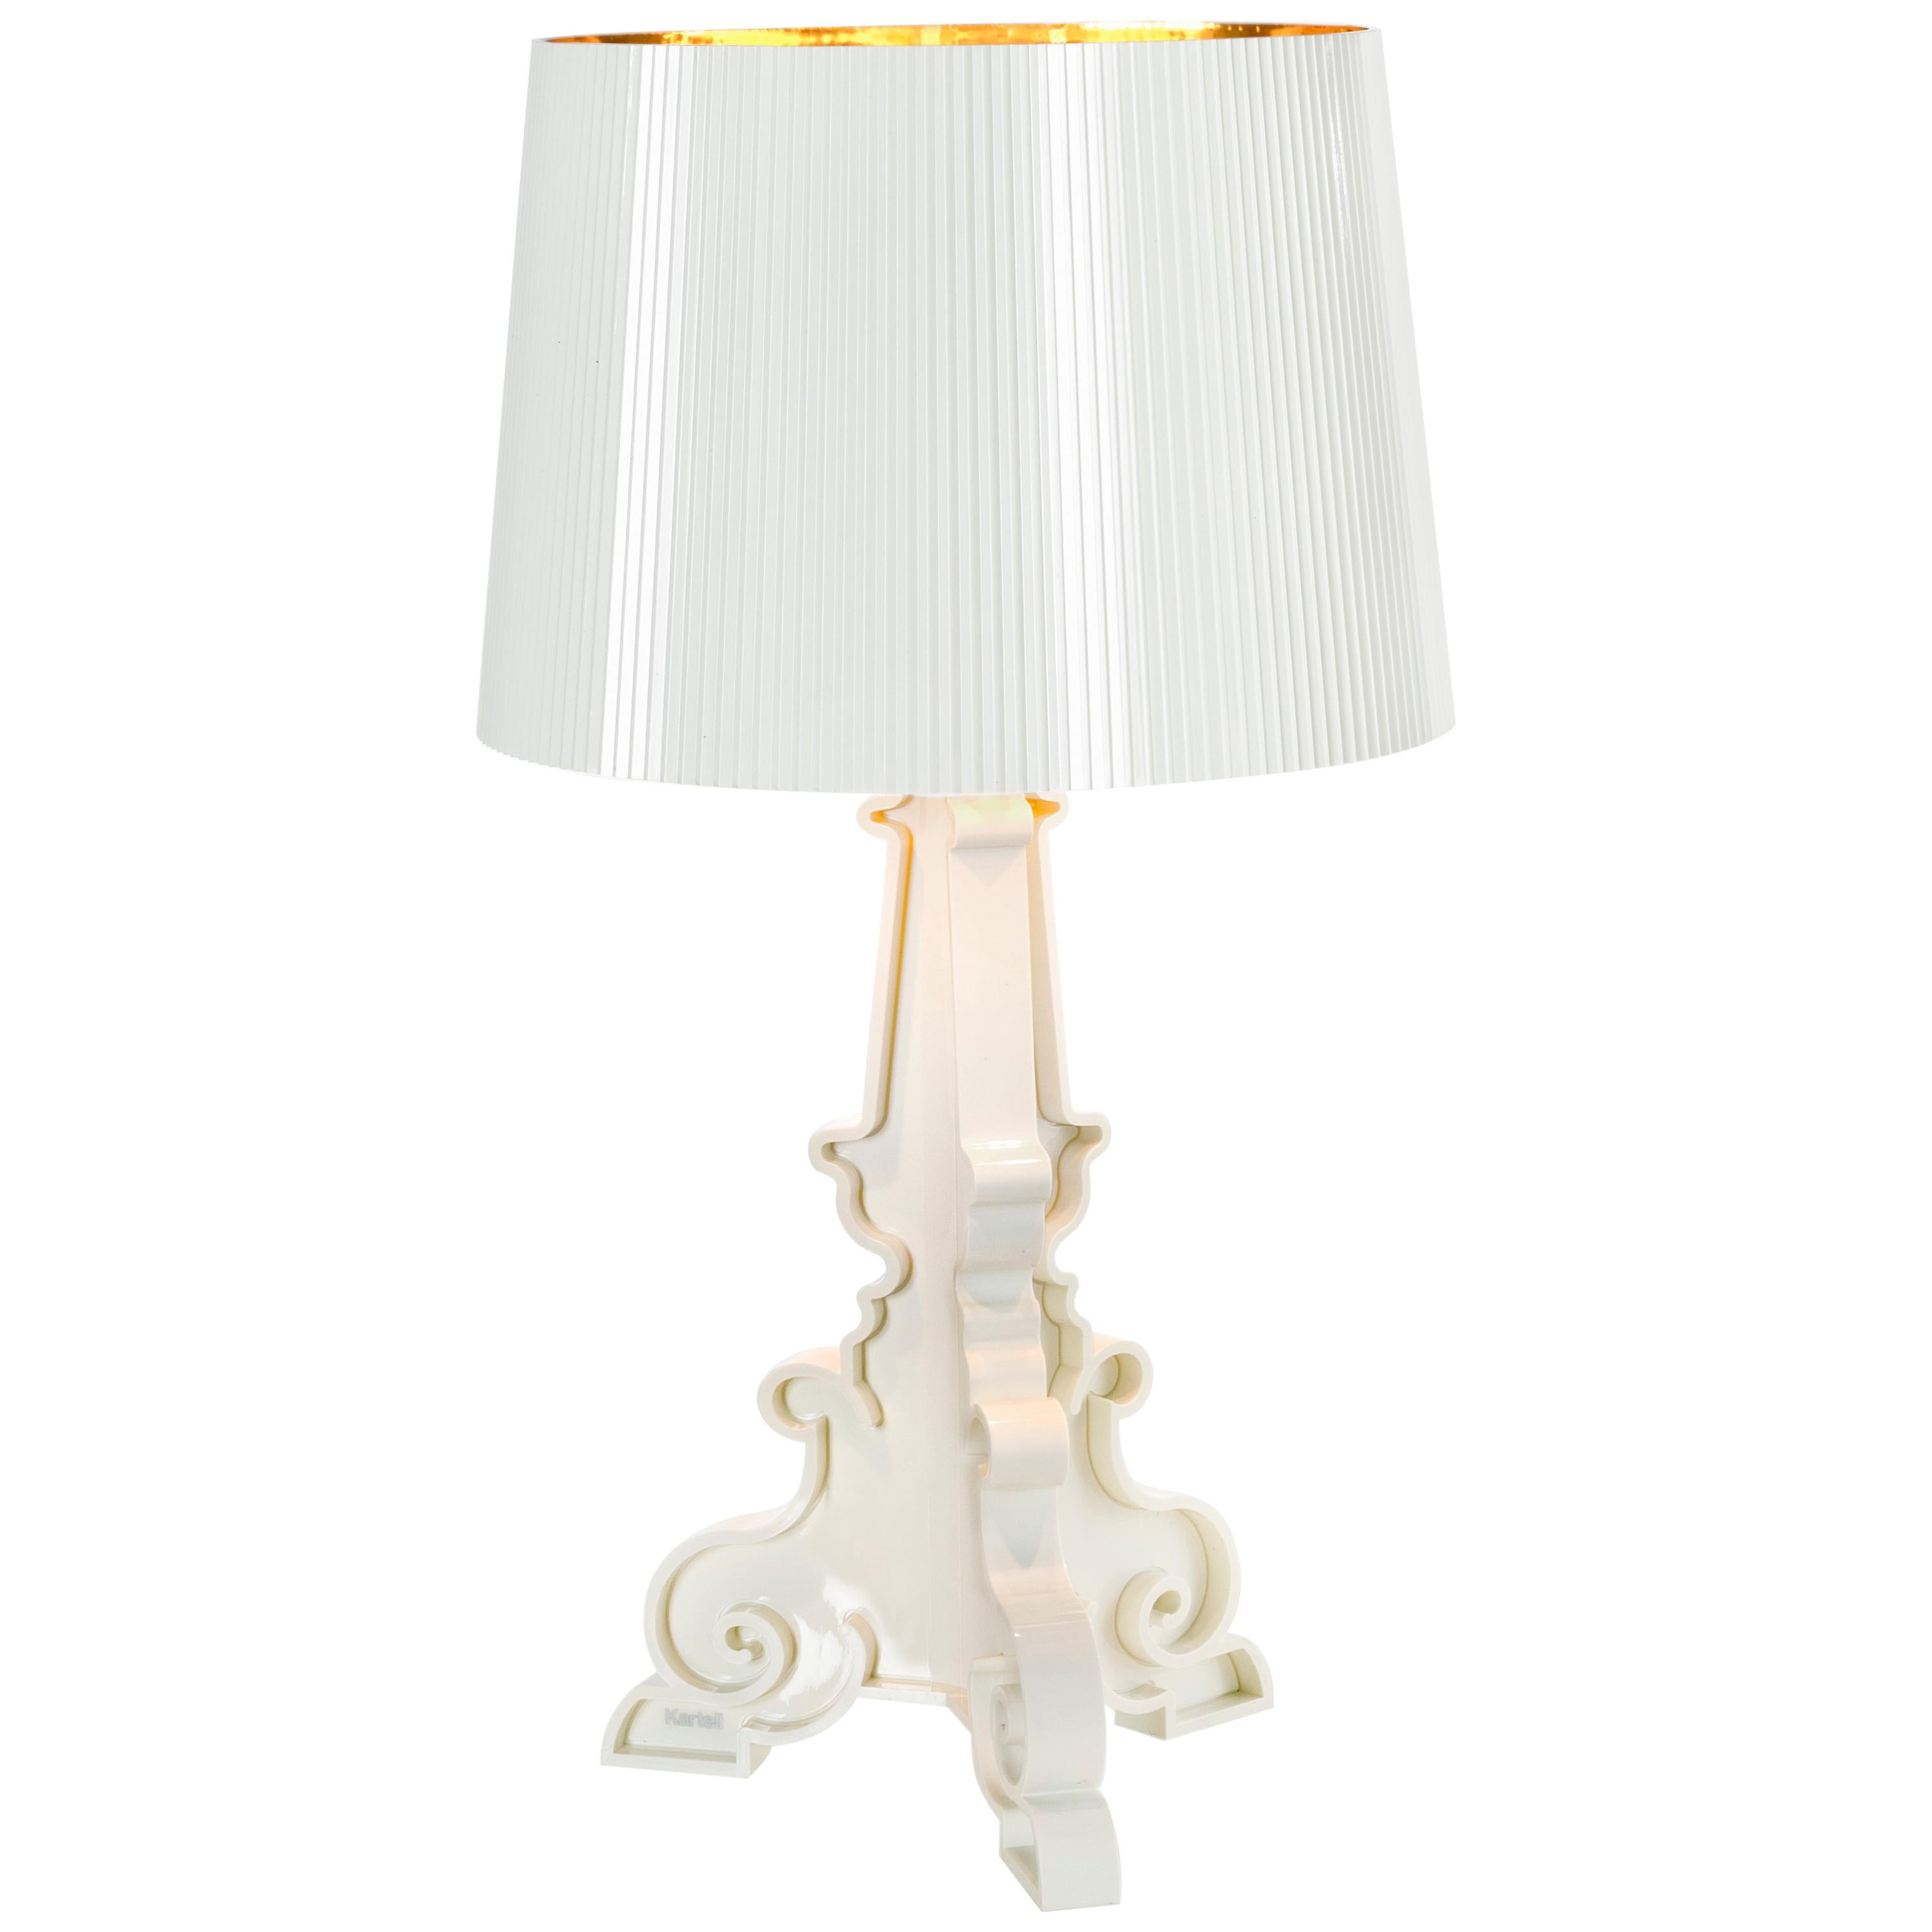 Kartell Bourgie Lamp in White and Gold by Ferruccio Laviani For Sale